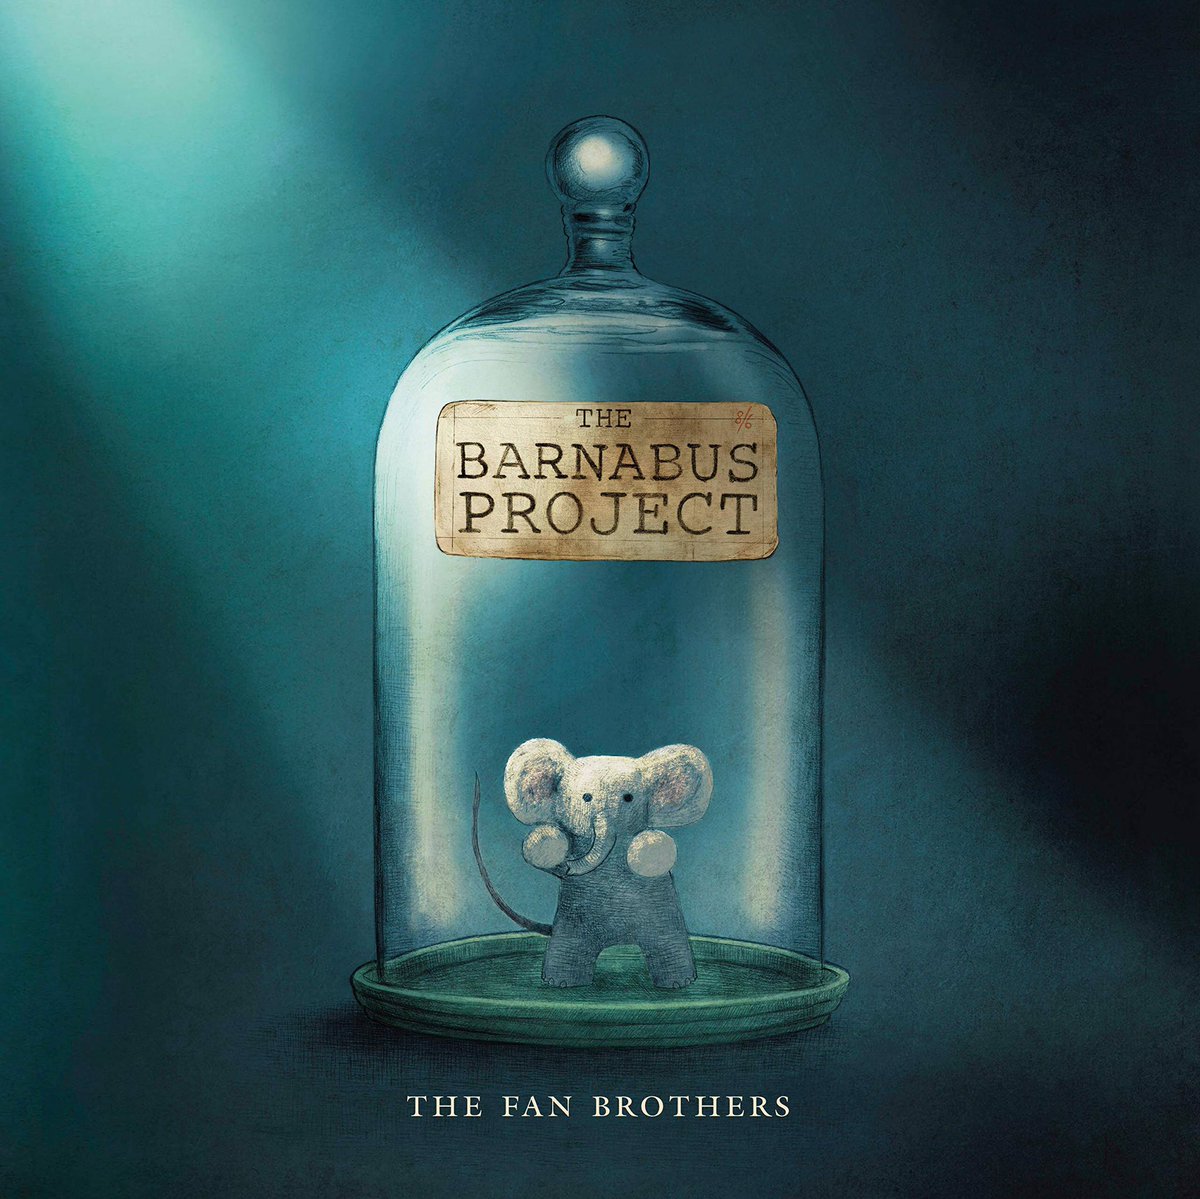 “The Barnabus Project” by The Fan Brothers  @opifan64 , published by  @QuartoKids  #SouthWestSuggests  #ckg22pick